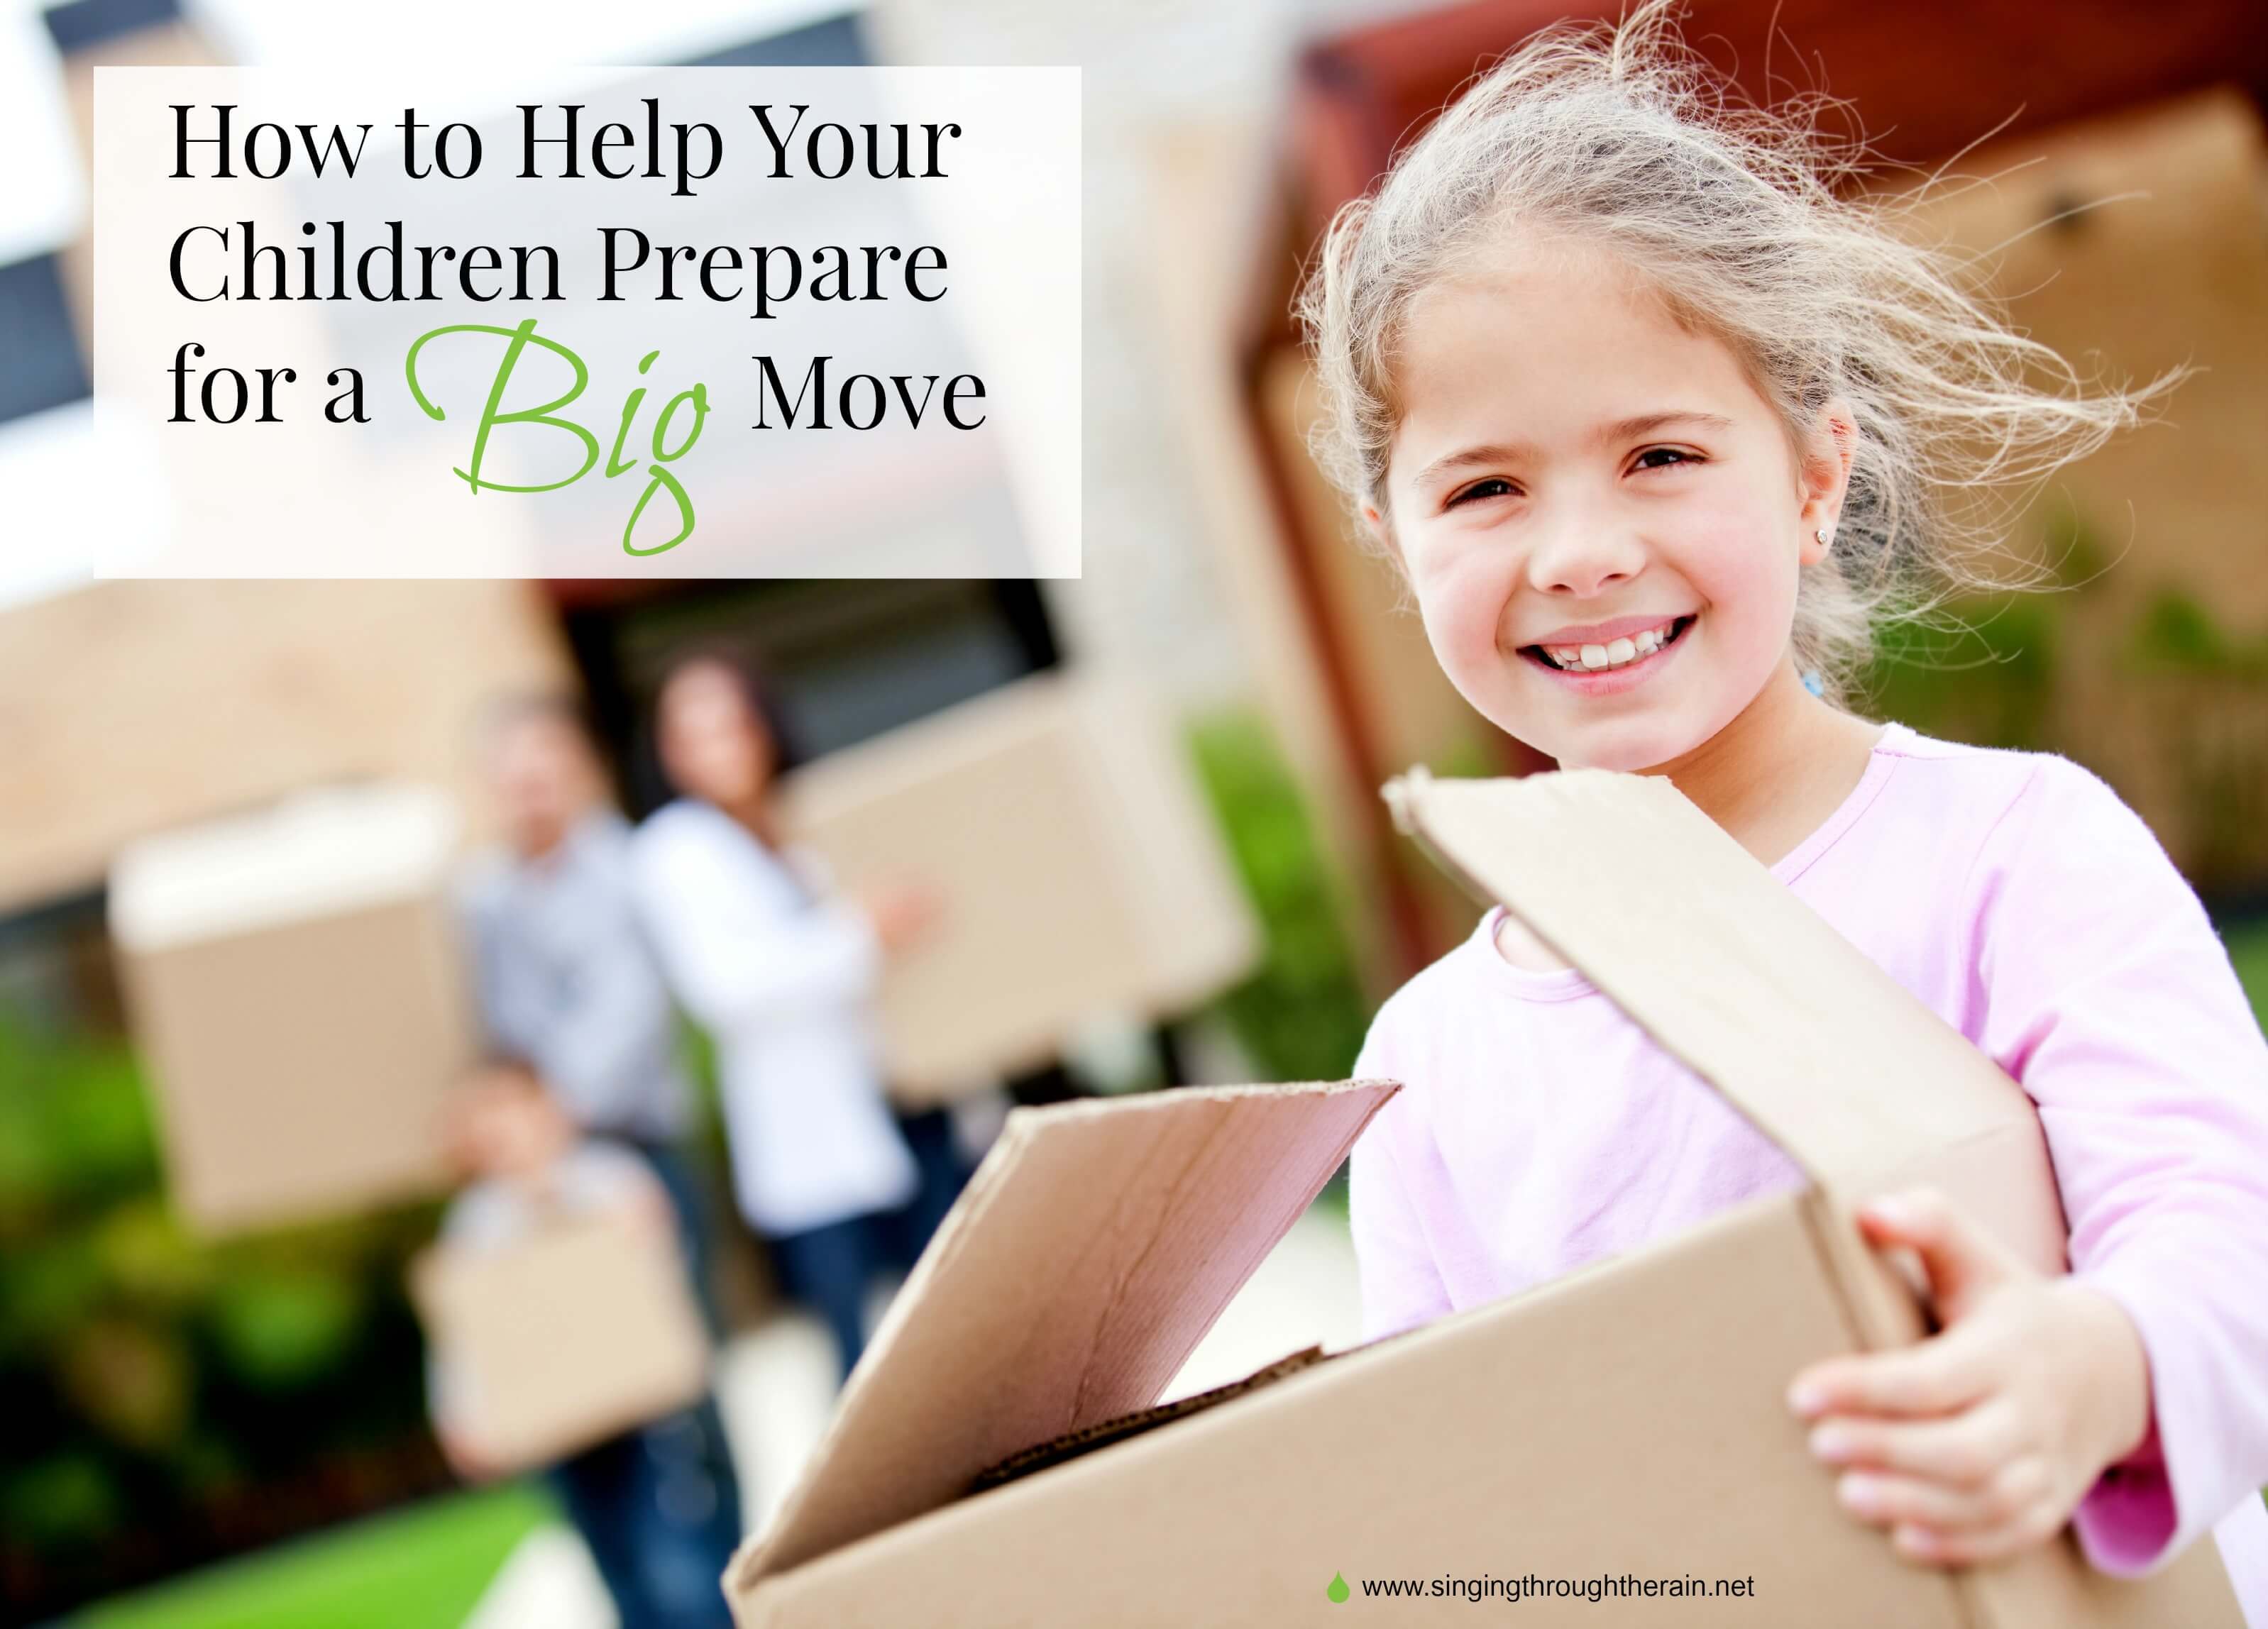 How to Prepare Your Children for a Big Move